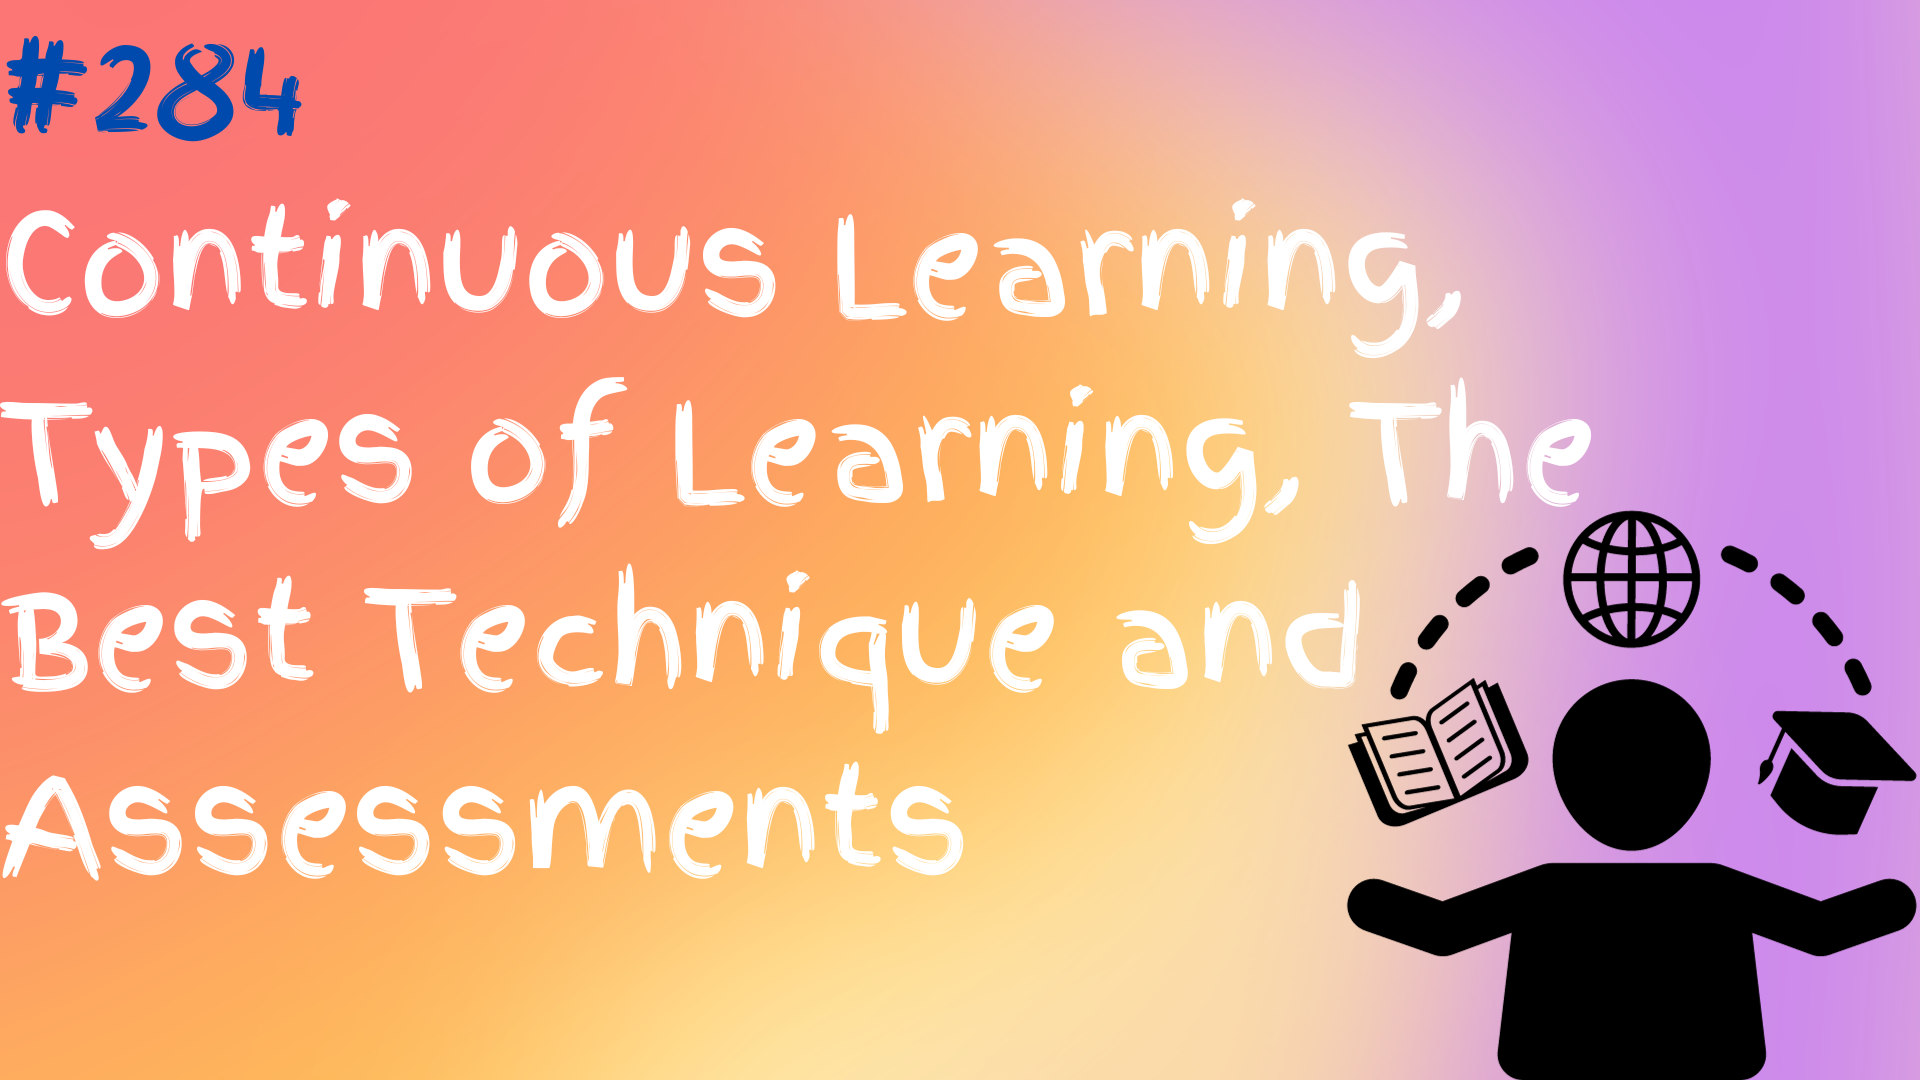 Read more about the article 284 Continuous Learning, Types of Learning, The Best Technique and Assessments